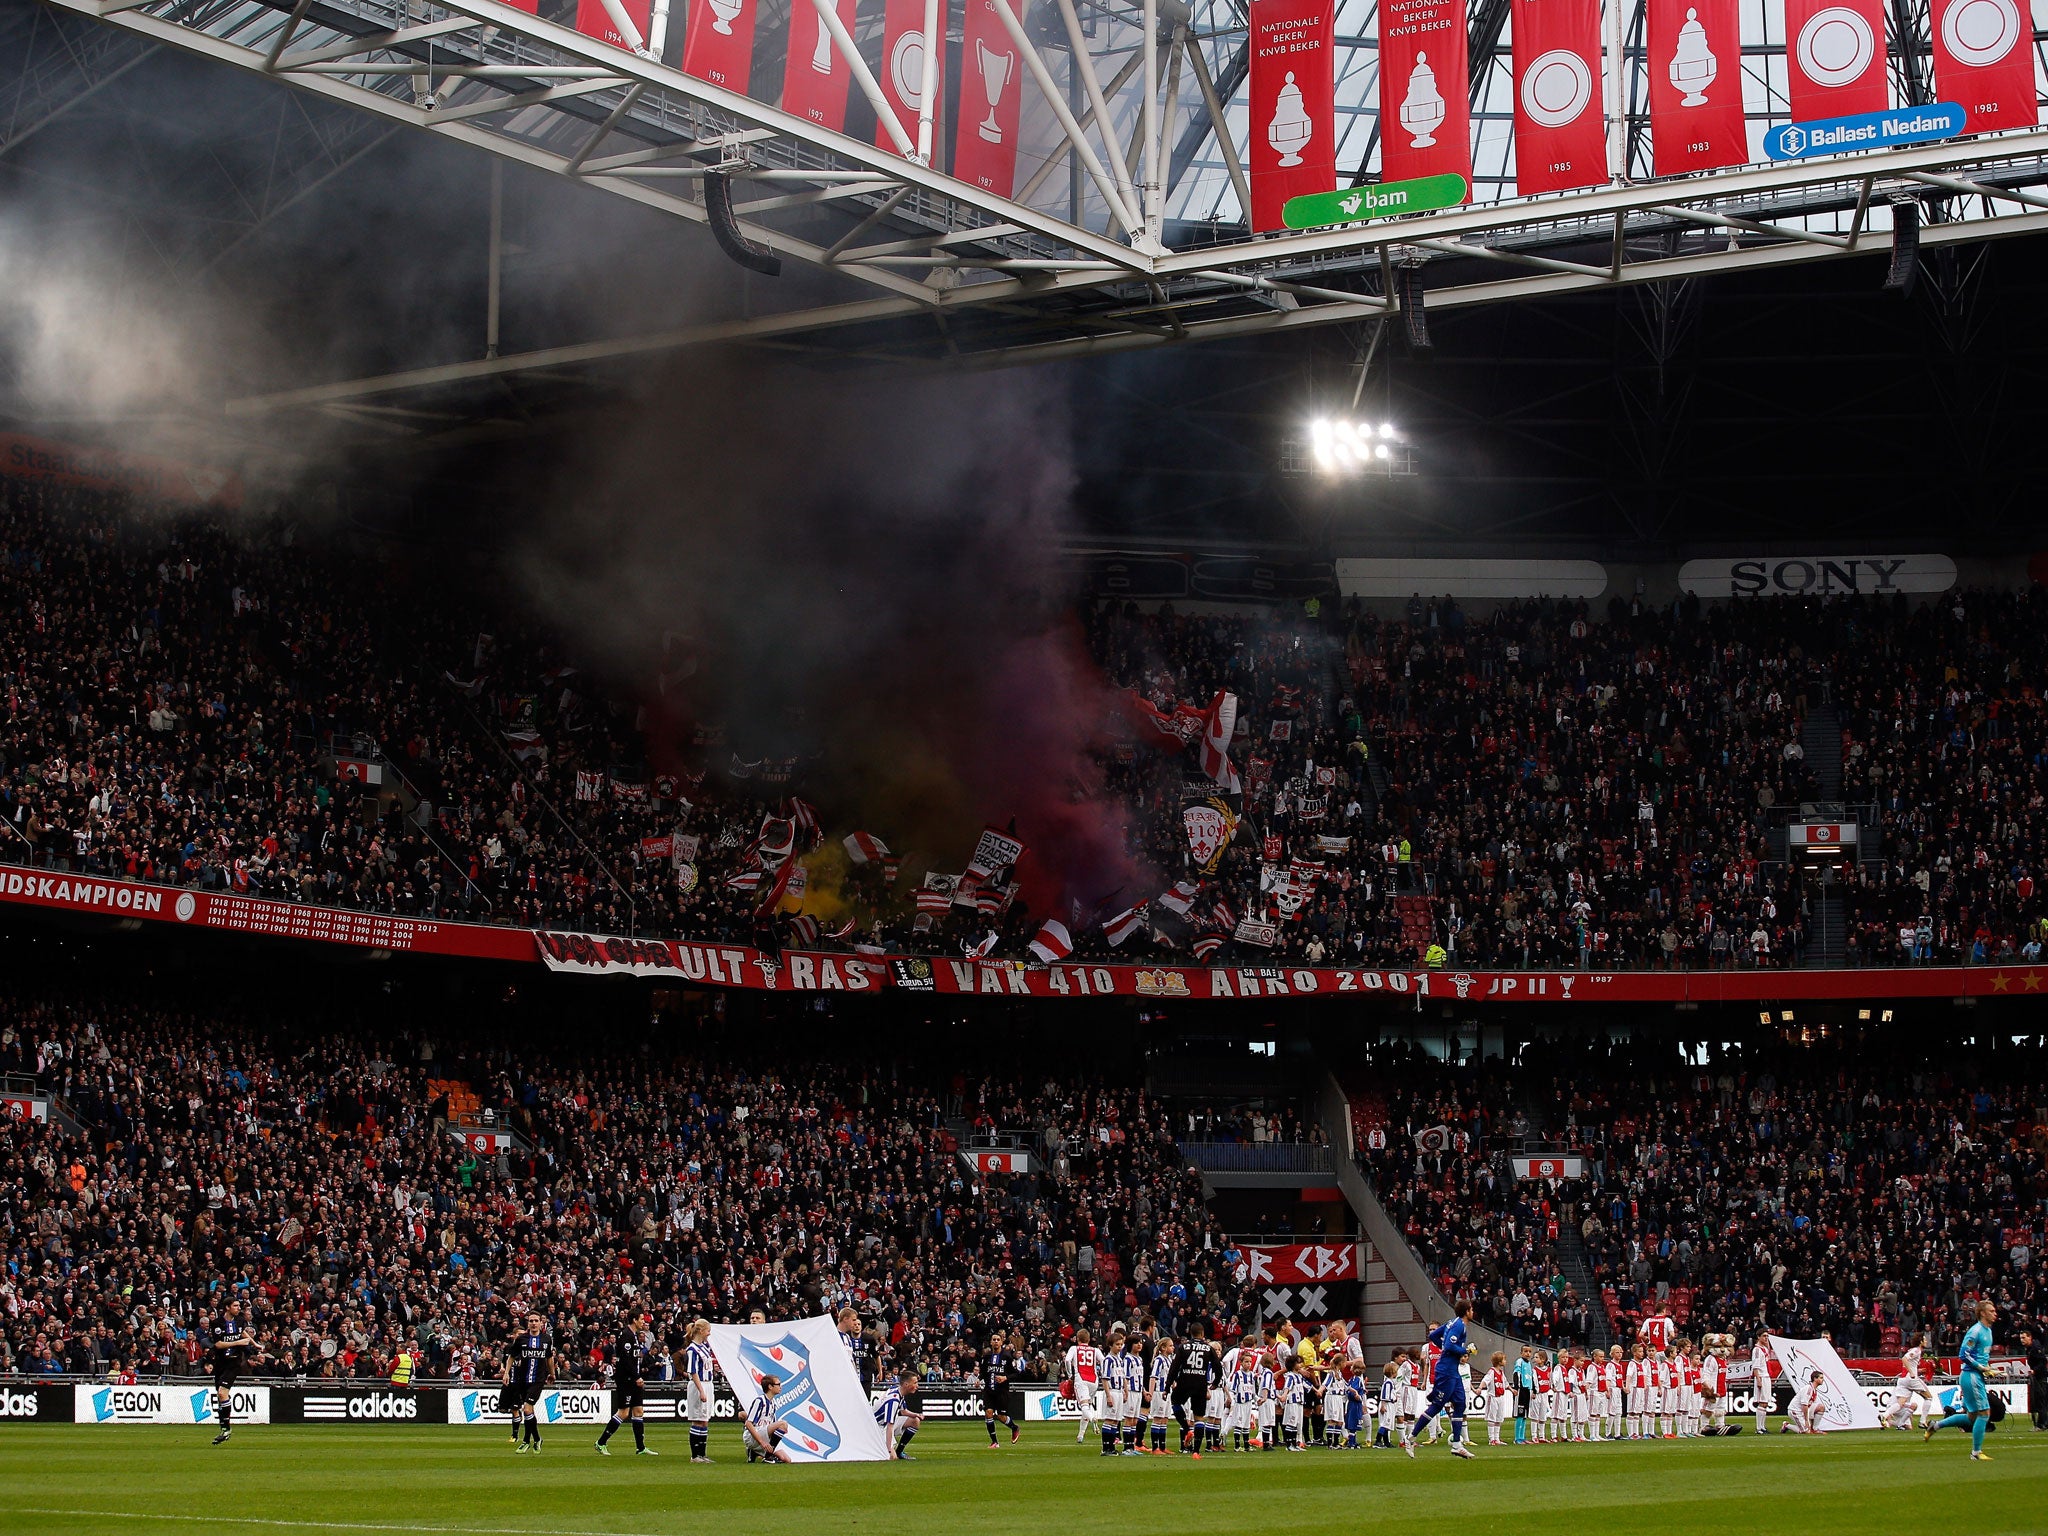 Ajax fans at the Amsterdam ArenA